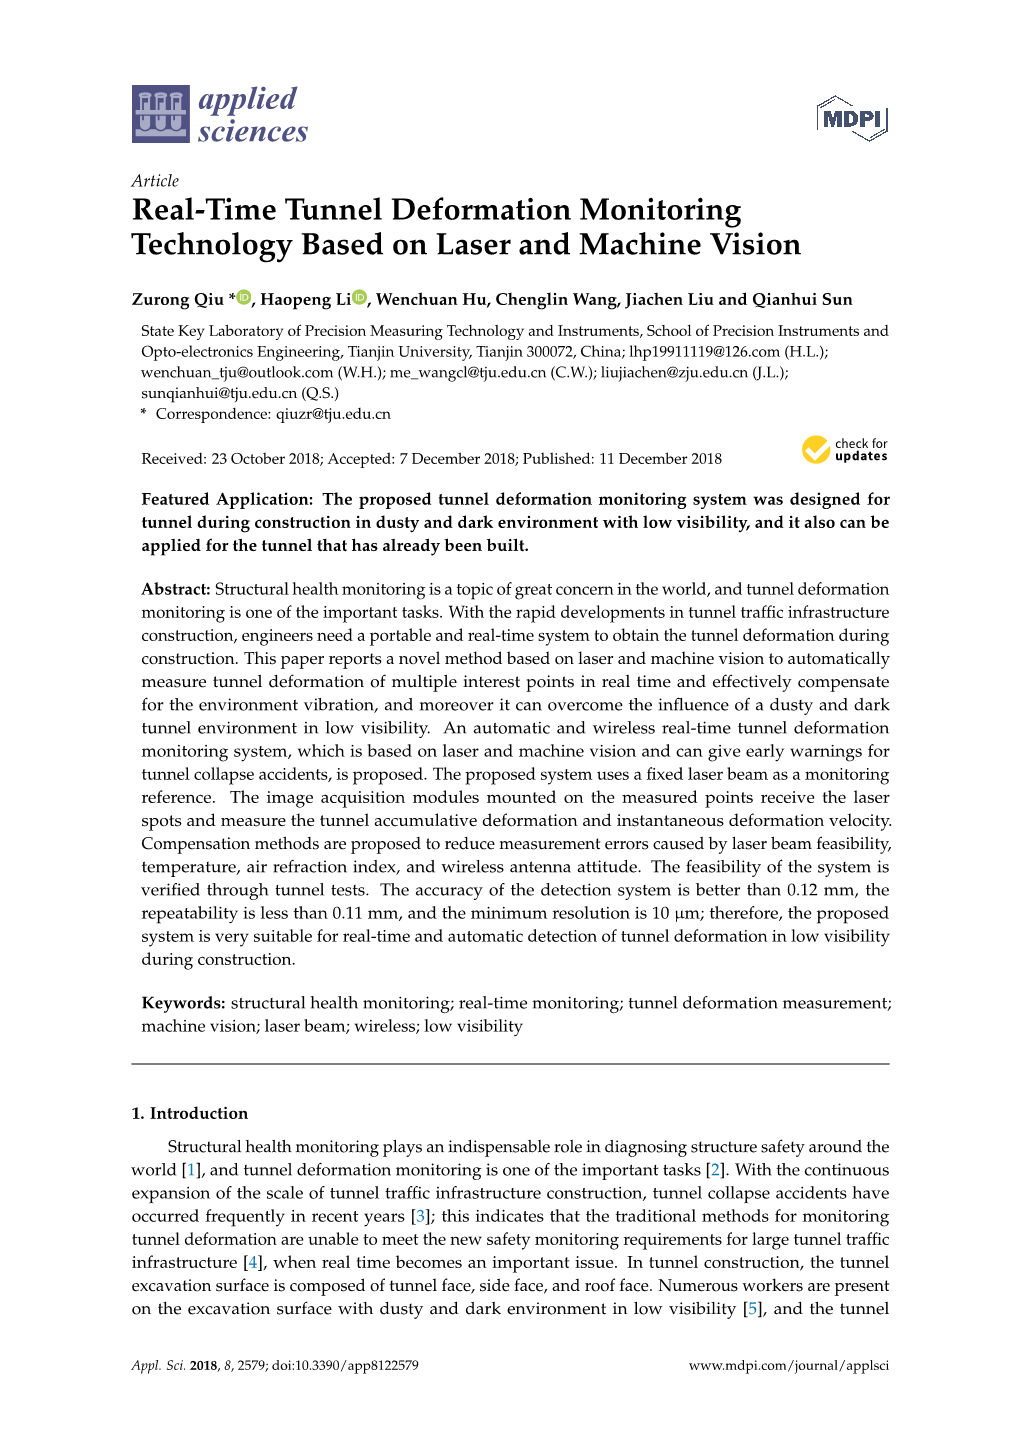 Real-Time Tunnel Deformation Monitoring Technology Based on Laser and Machine Vision